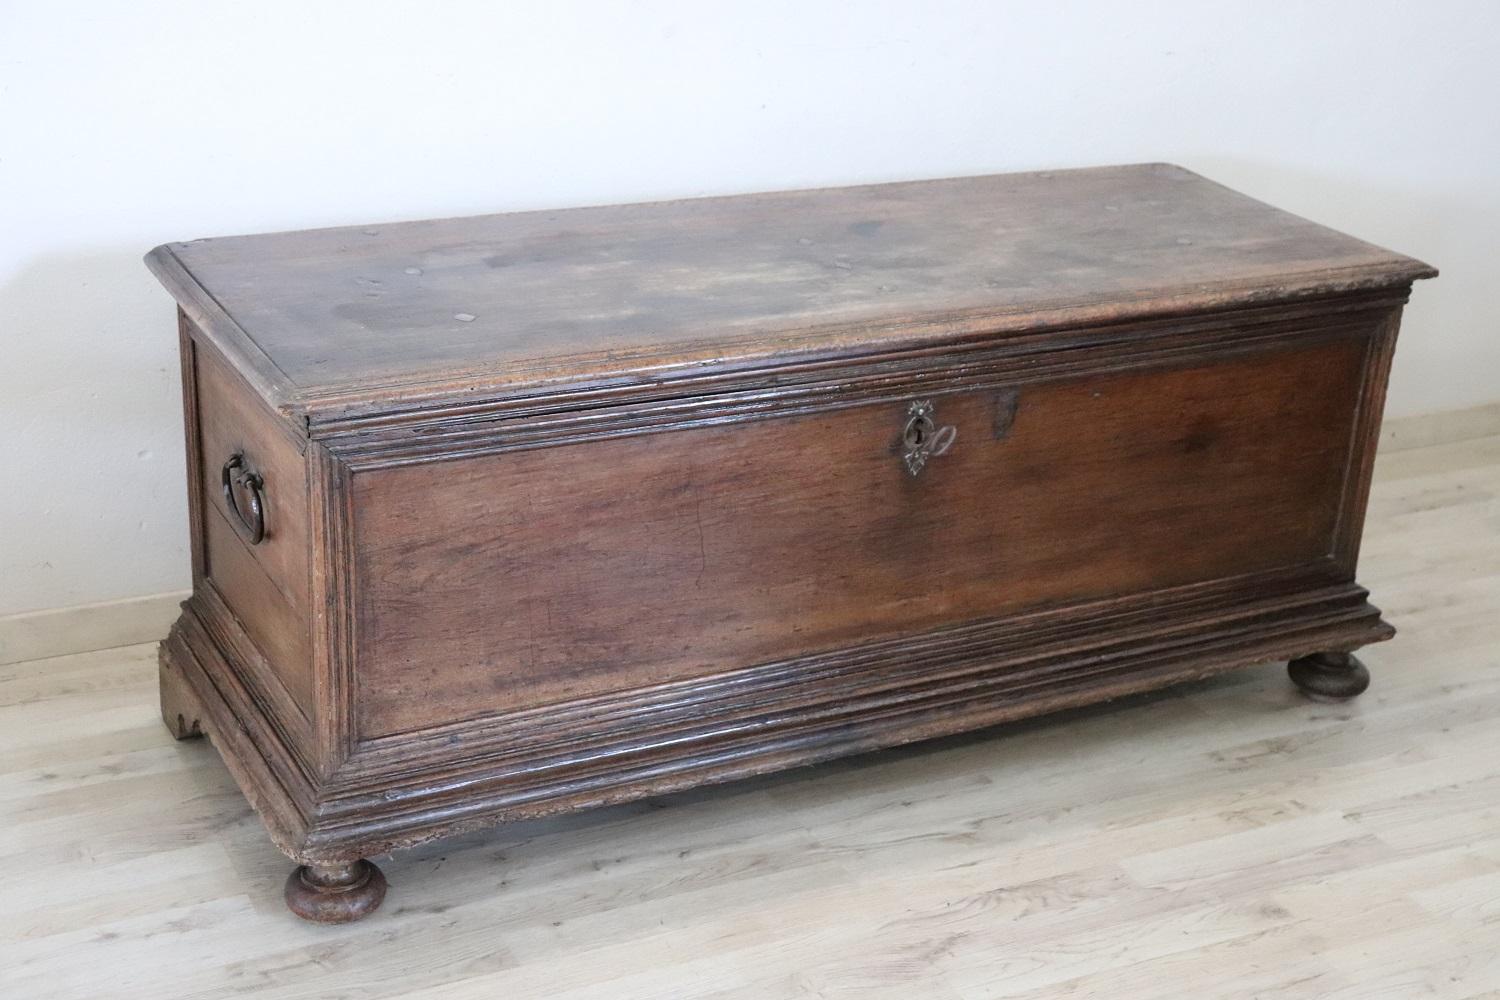 Beautiful antique blanket chest in solid walnut wood, 1650s. The antique blanket chest also completely original and has great charm. Internally equipped with a small drawer whose door is used to support and keep open the large and heavy lid of the